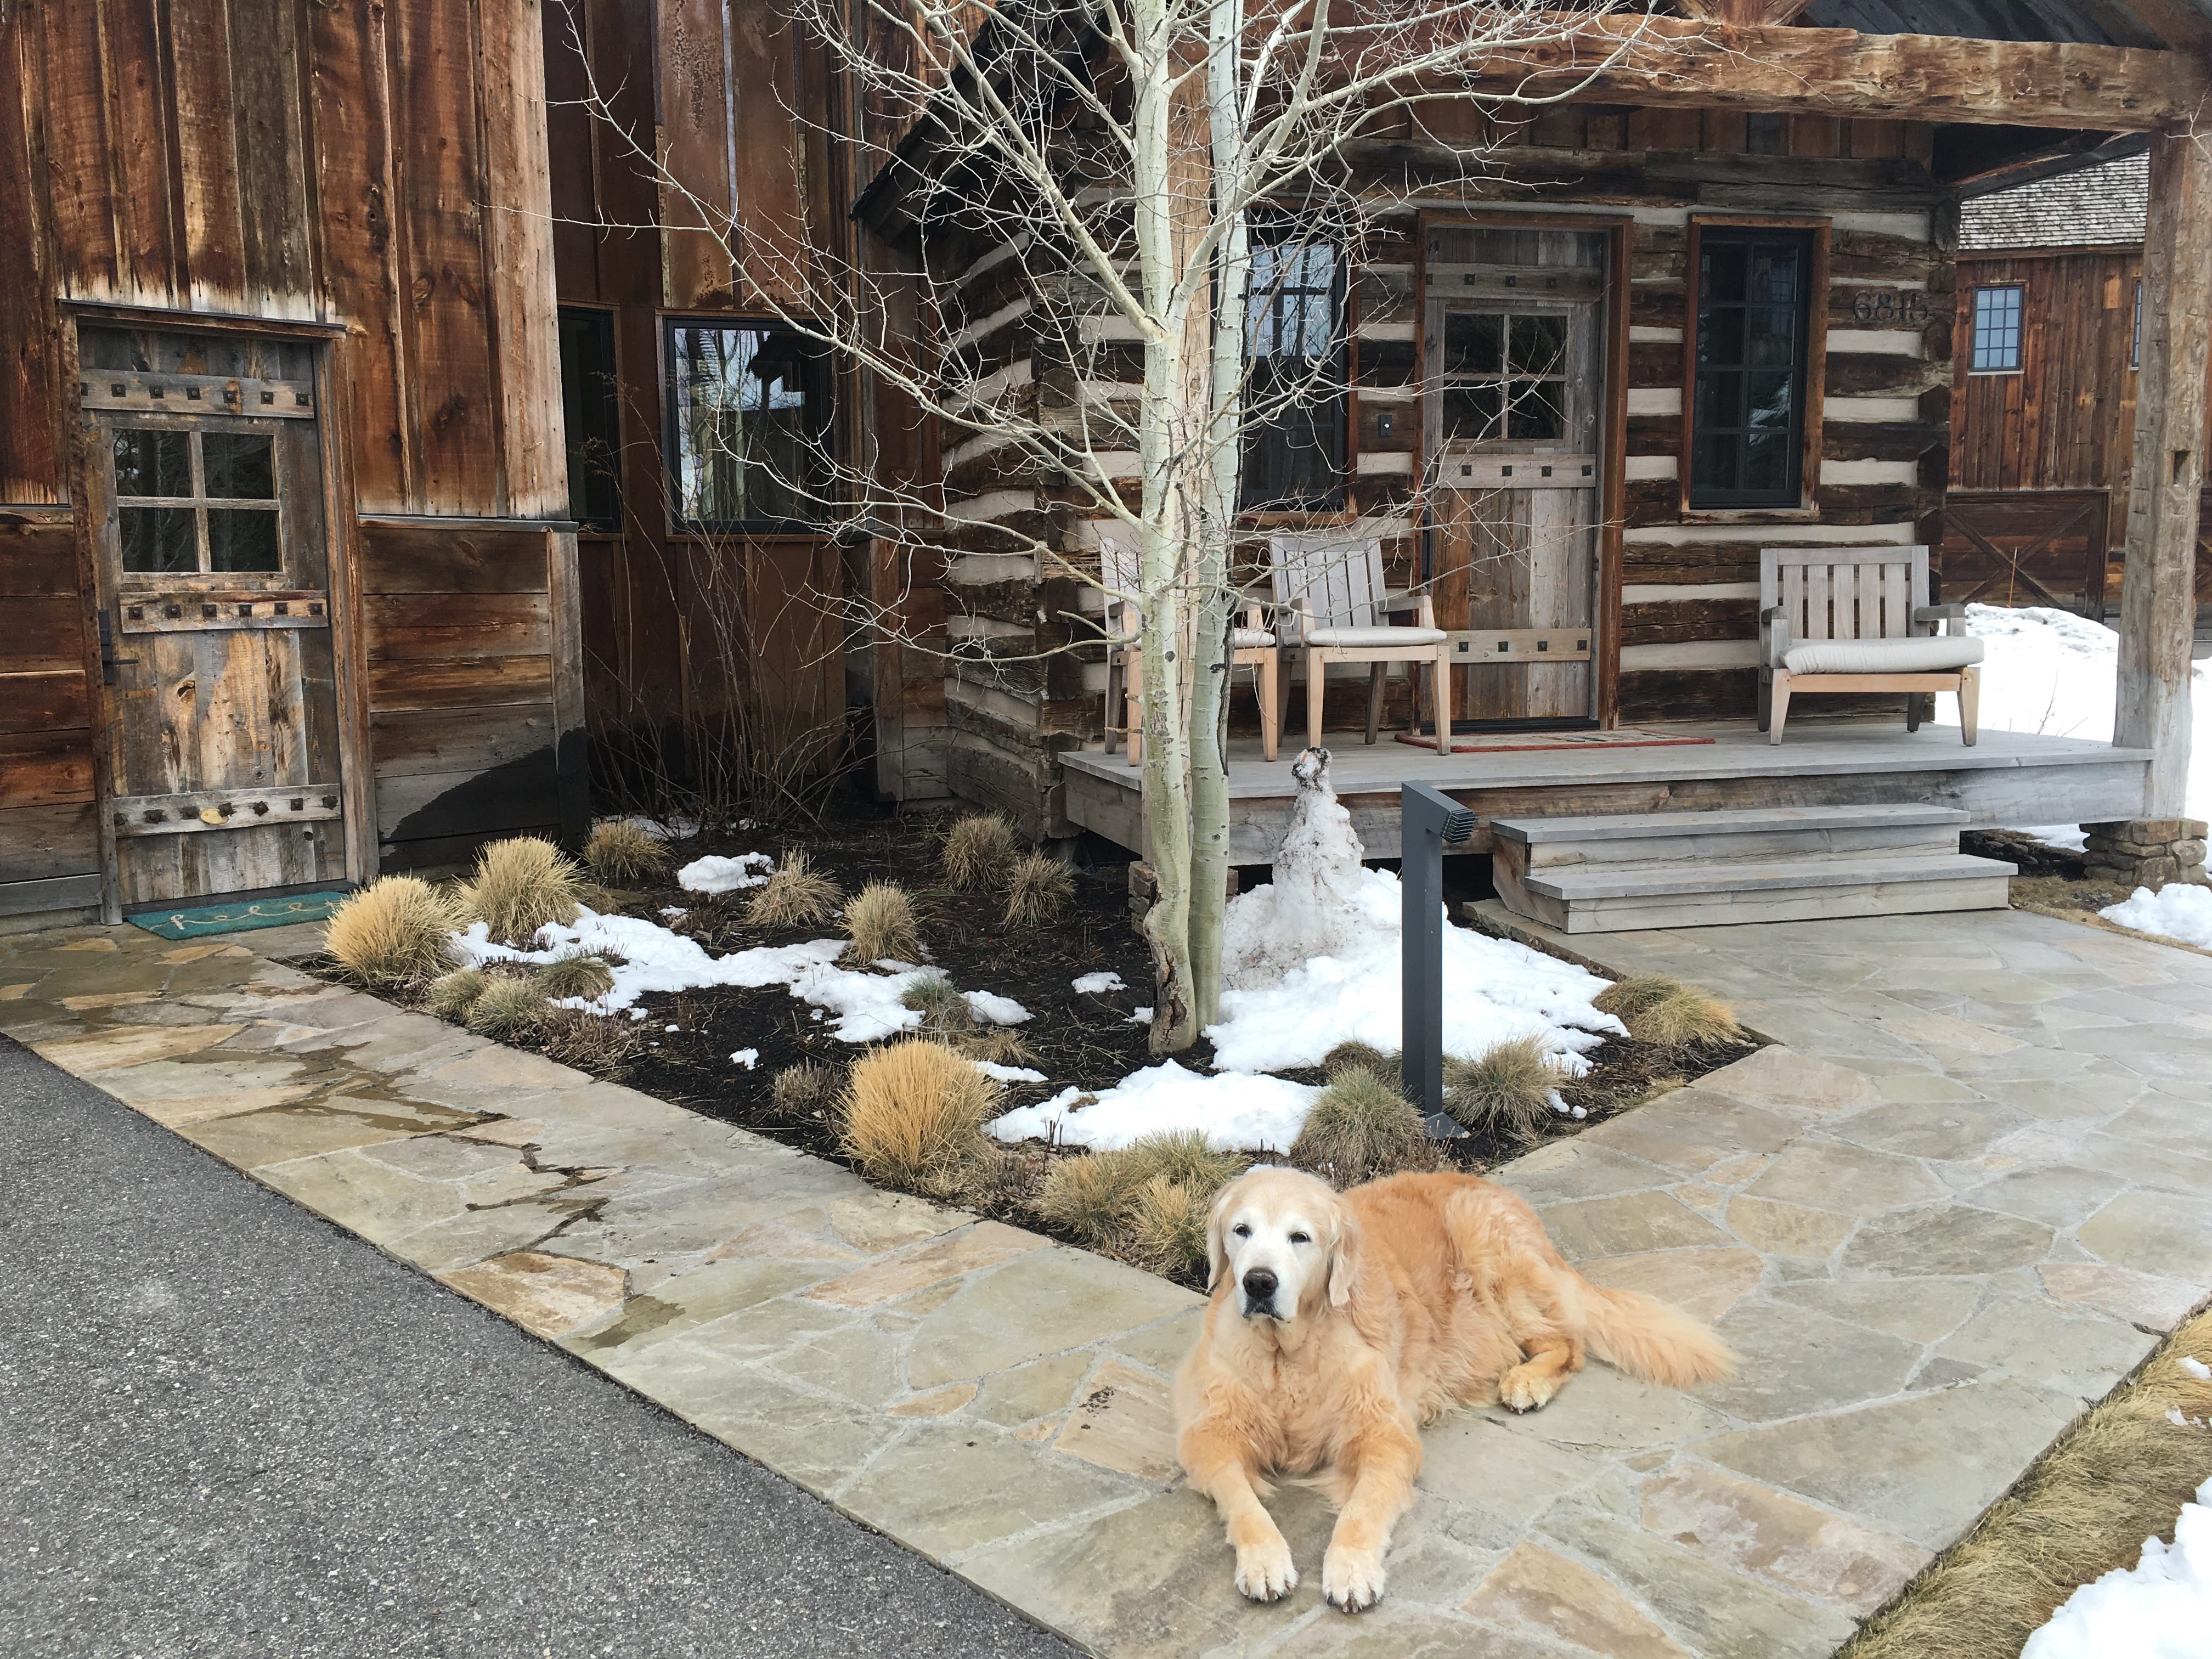 Family Time In Jackson Hole, Wyoming